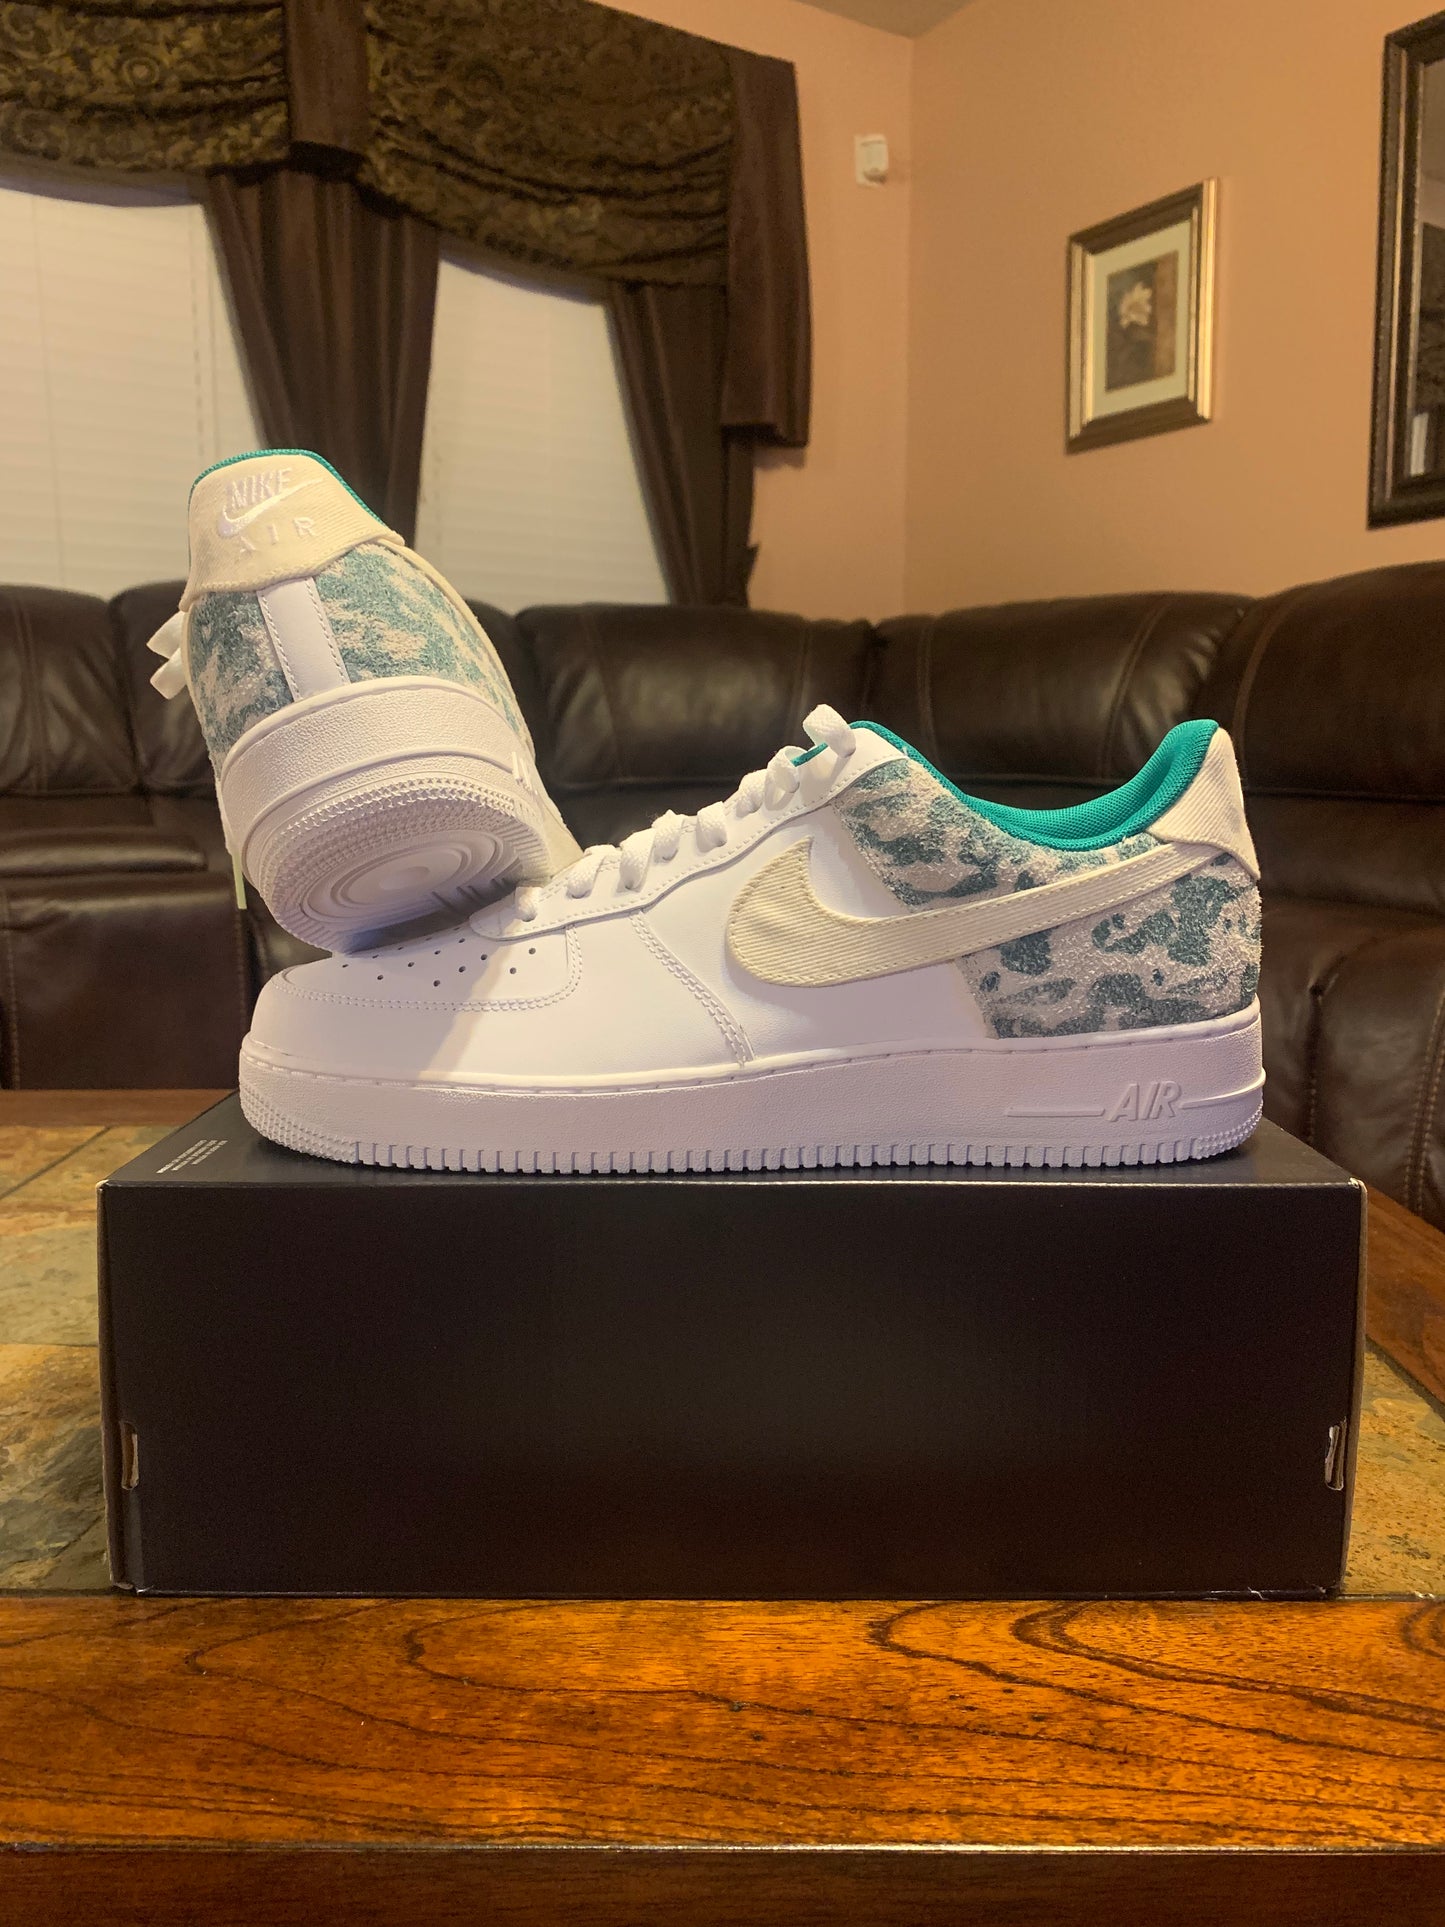 Nike Air Force 1 '07 LV8 Neptune Green Camo - DX3365 -100- Size 13